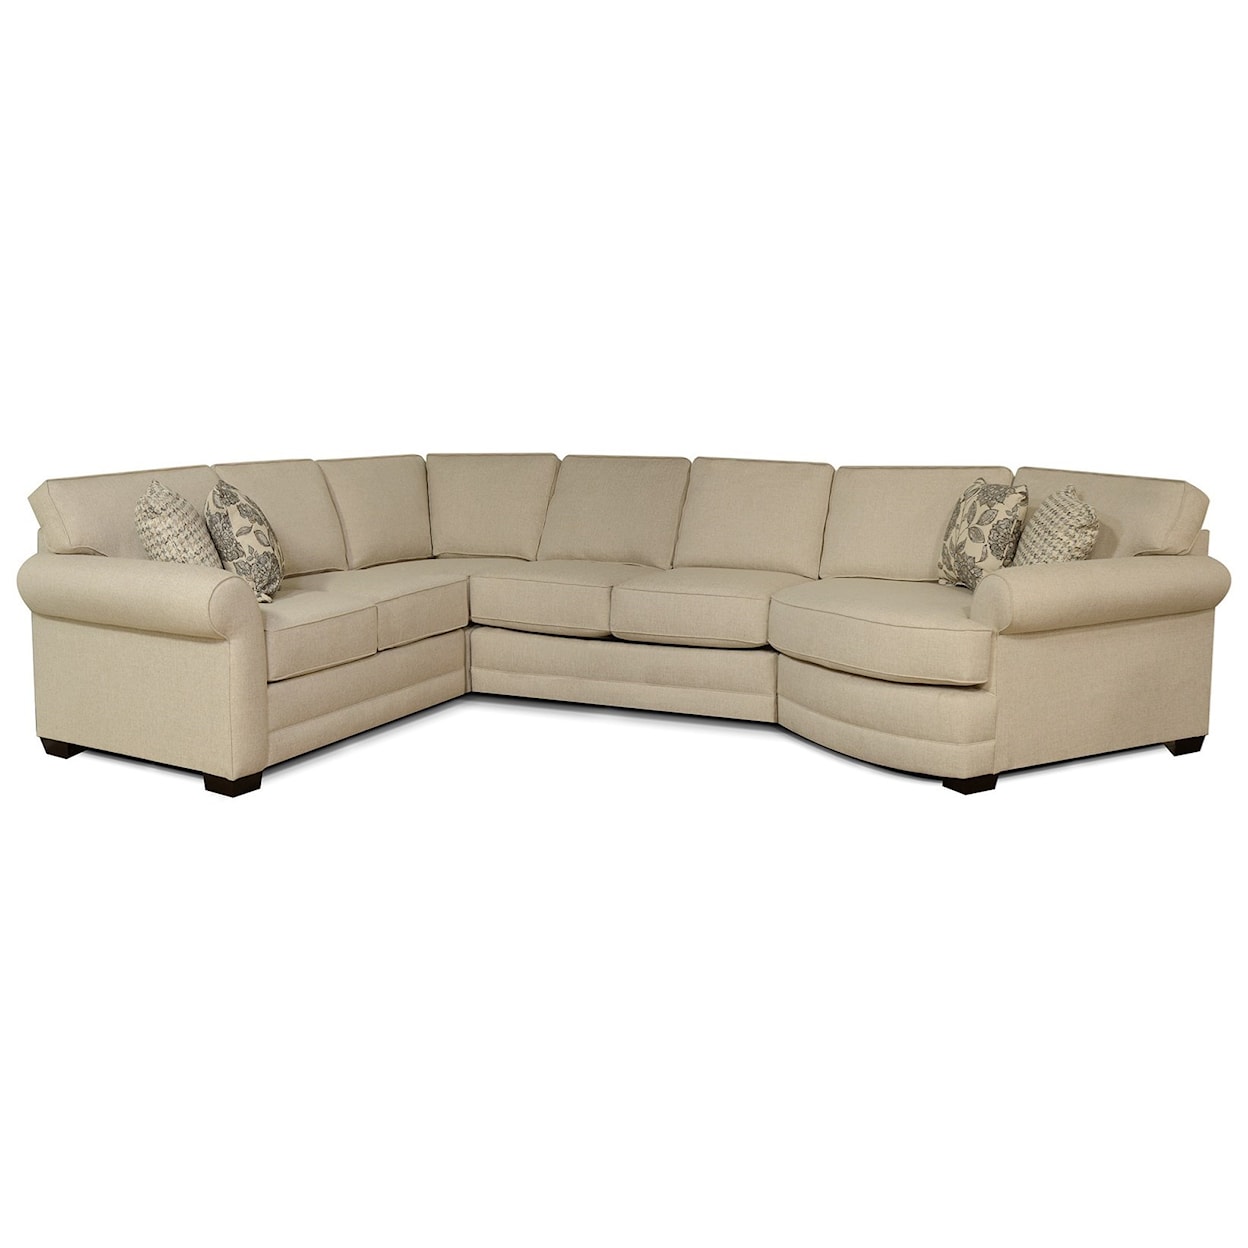 Dimensions 5630 Series 5 Seat Sectional Sofa Cuddler